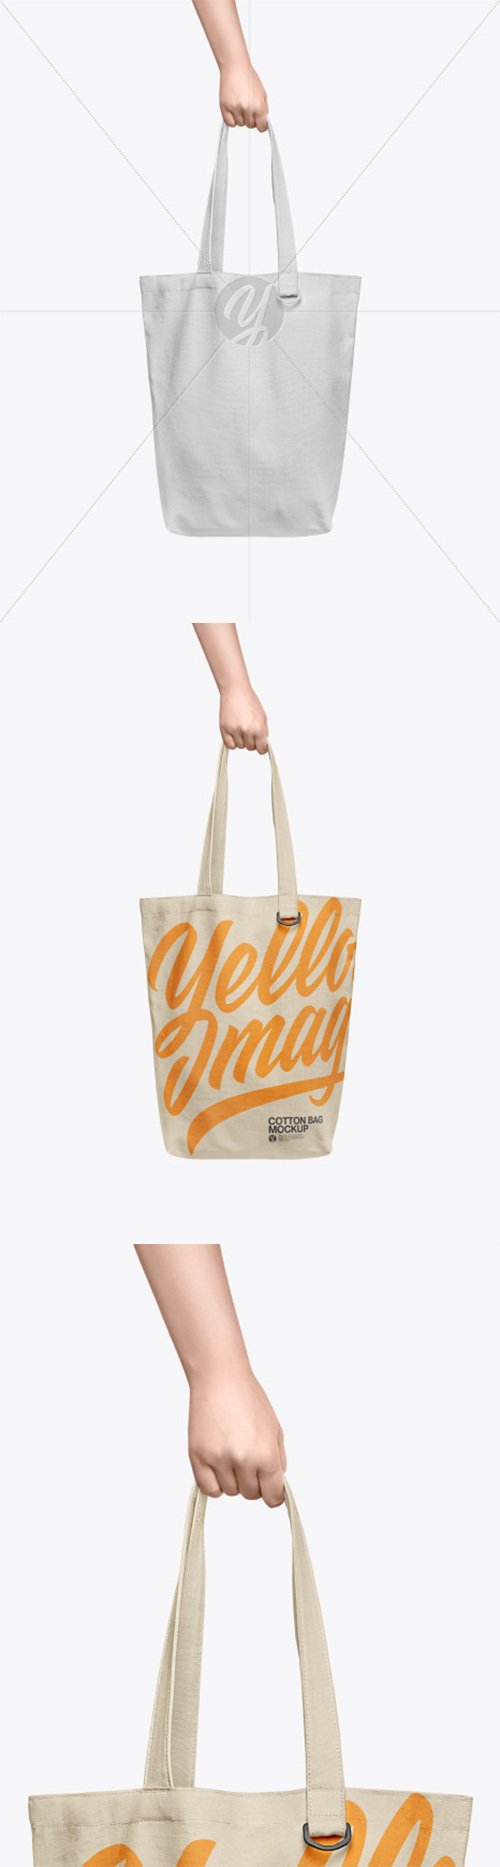 Cotton Bag in a Hand Mockup 56802 TIF